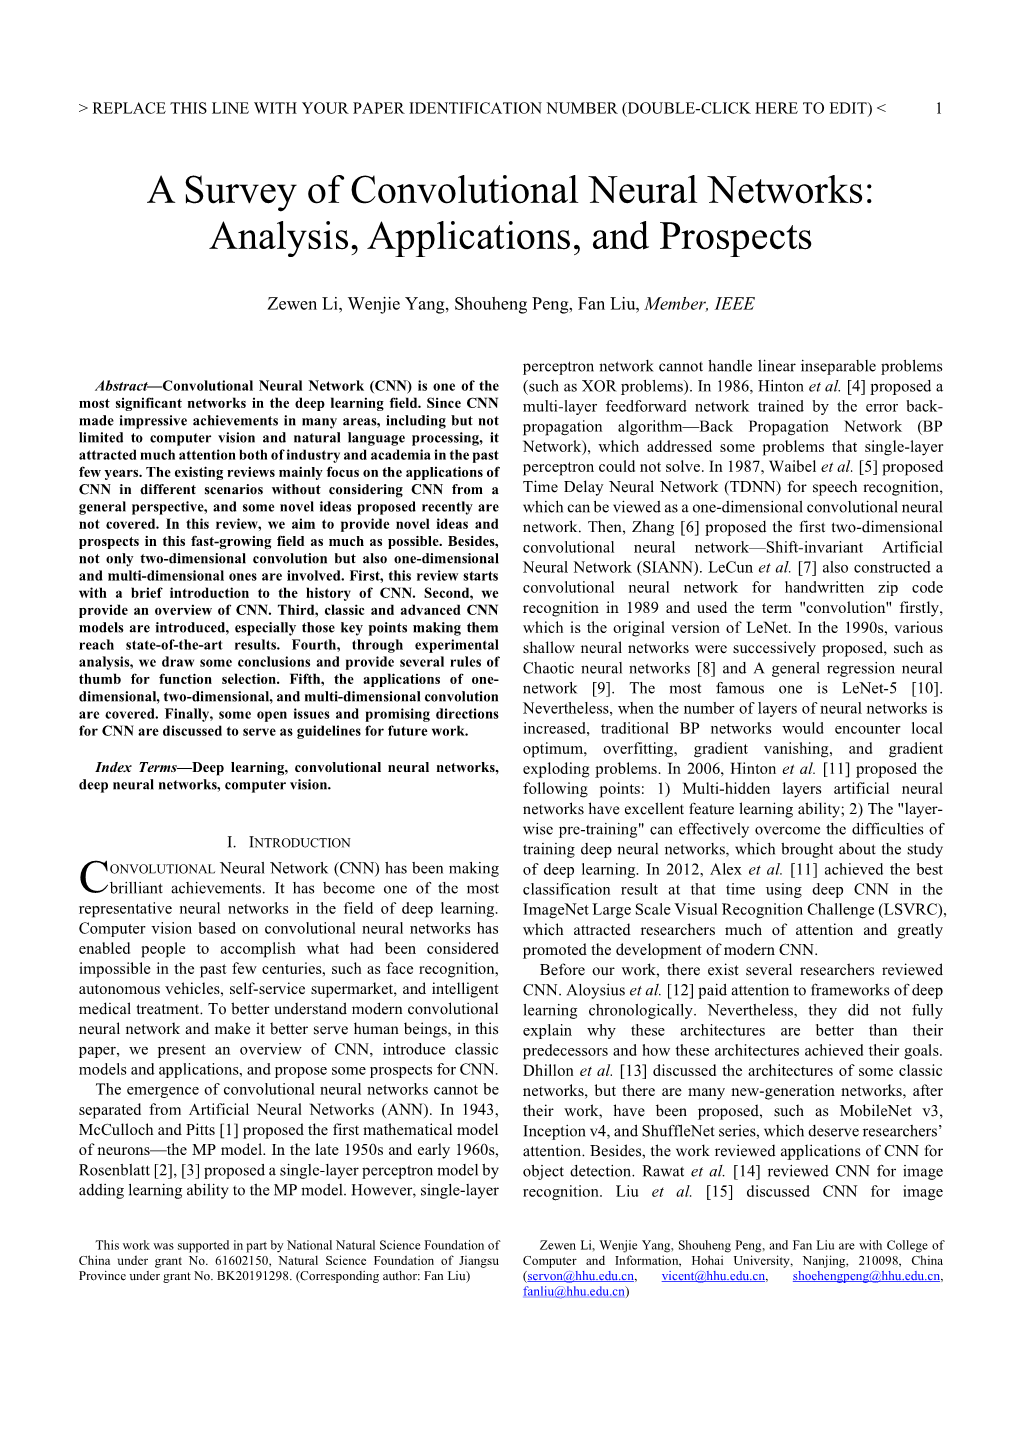 A Survey of Convolutional Neural Networks: Analysis, Applications, and Prospects